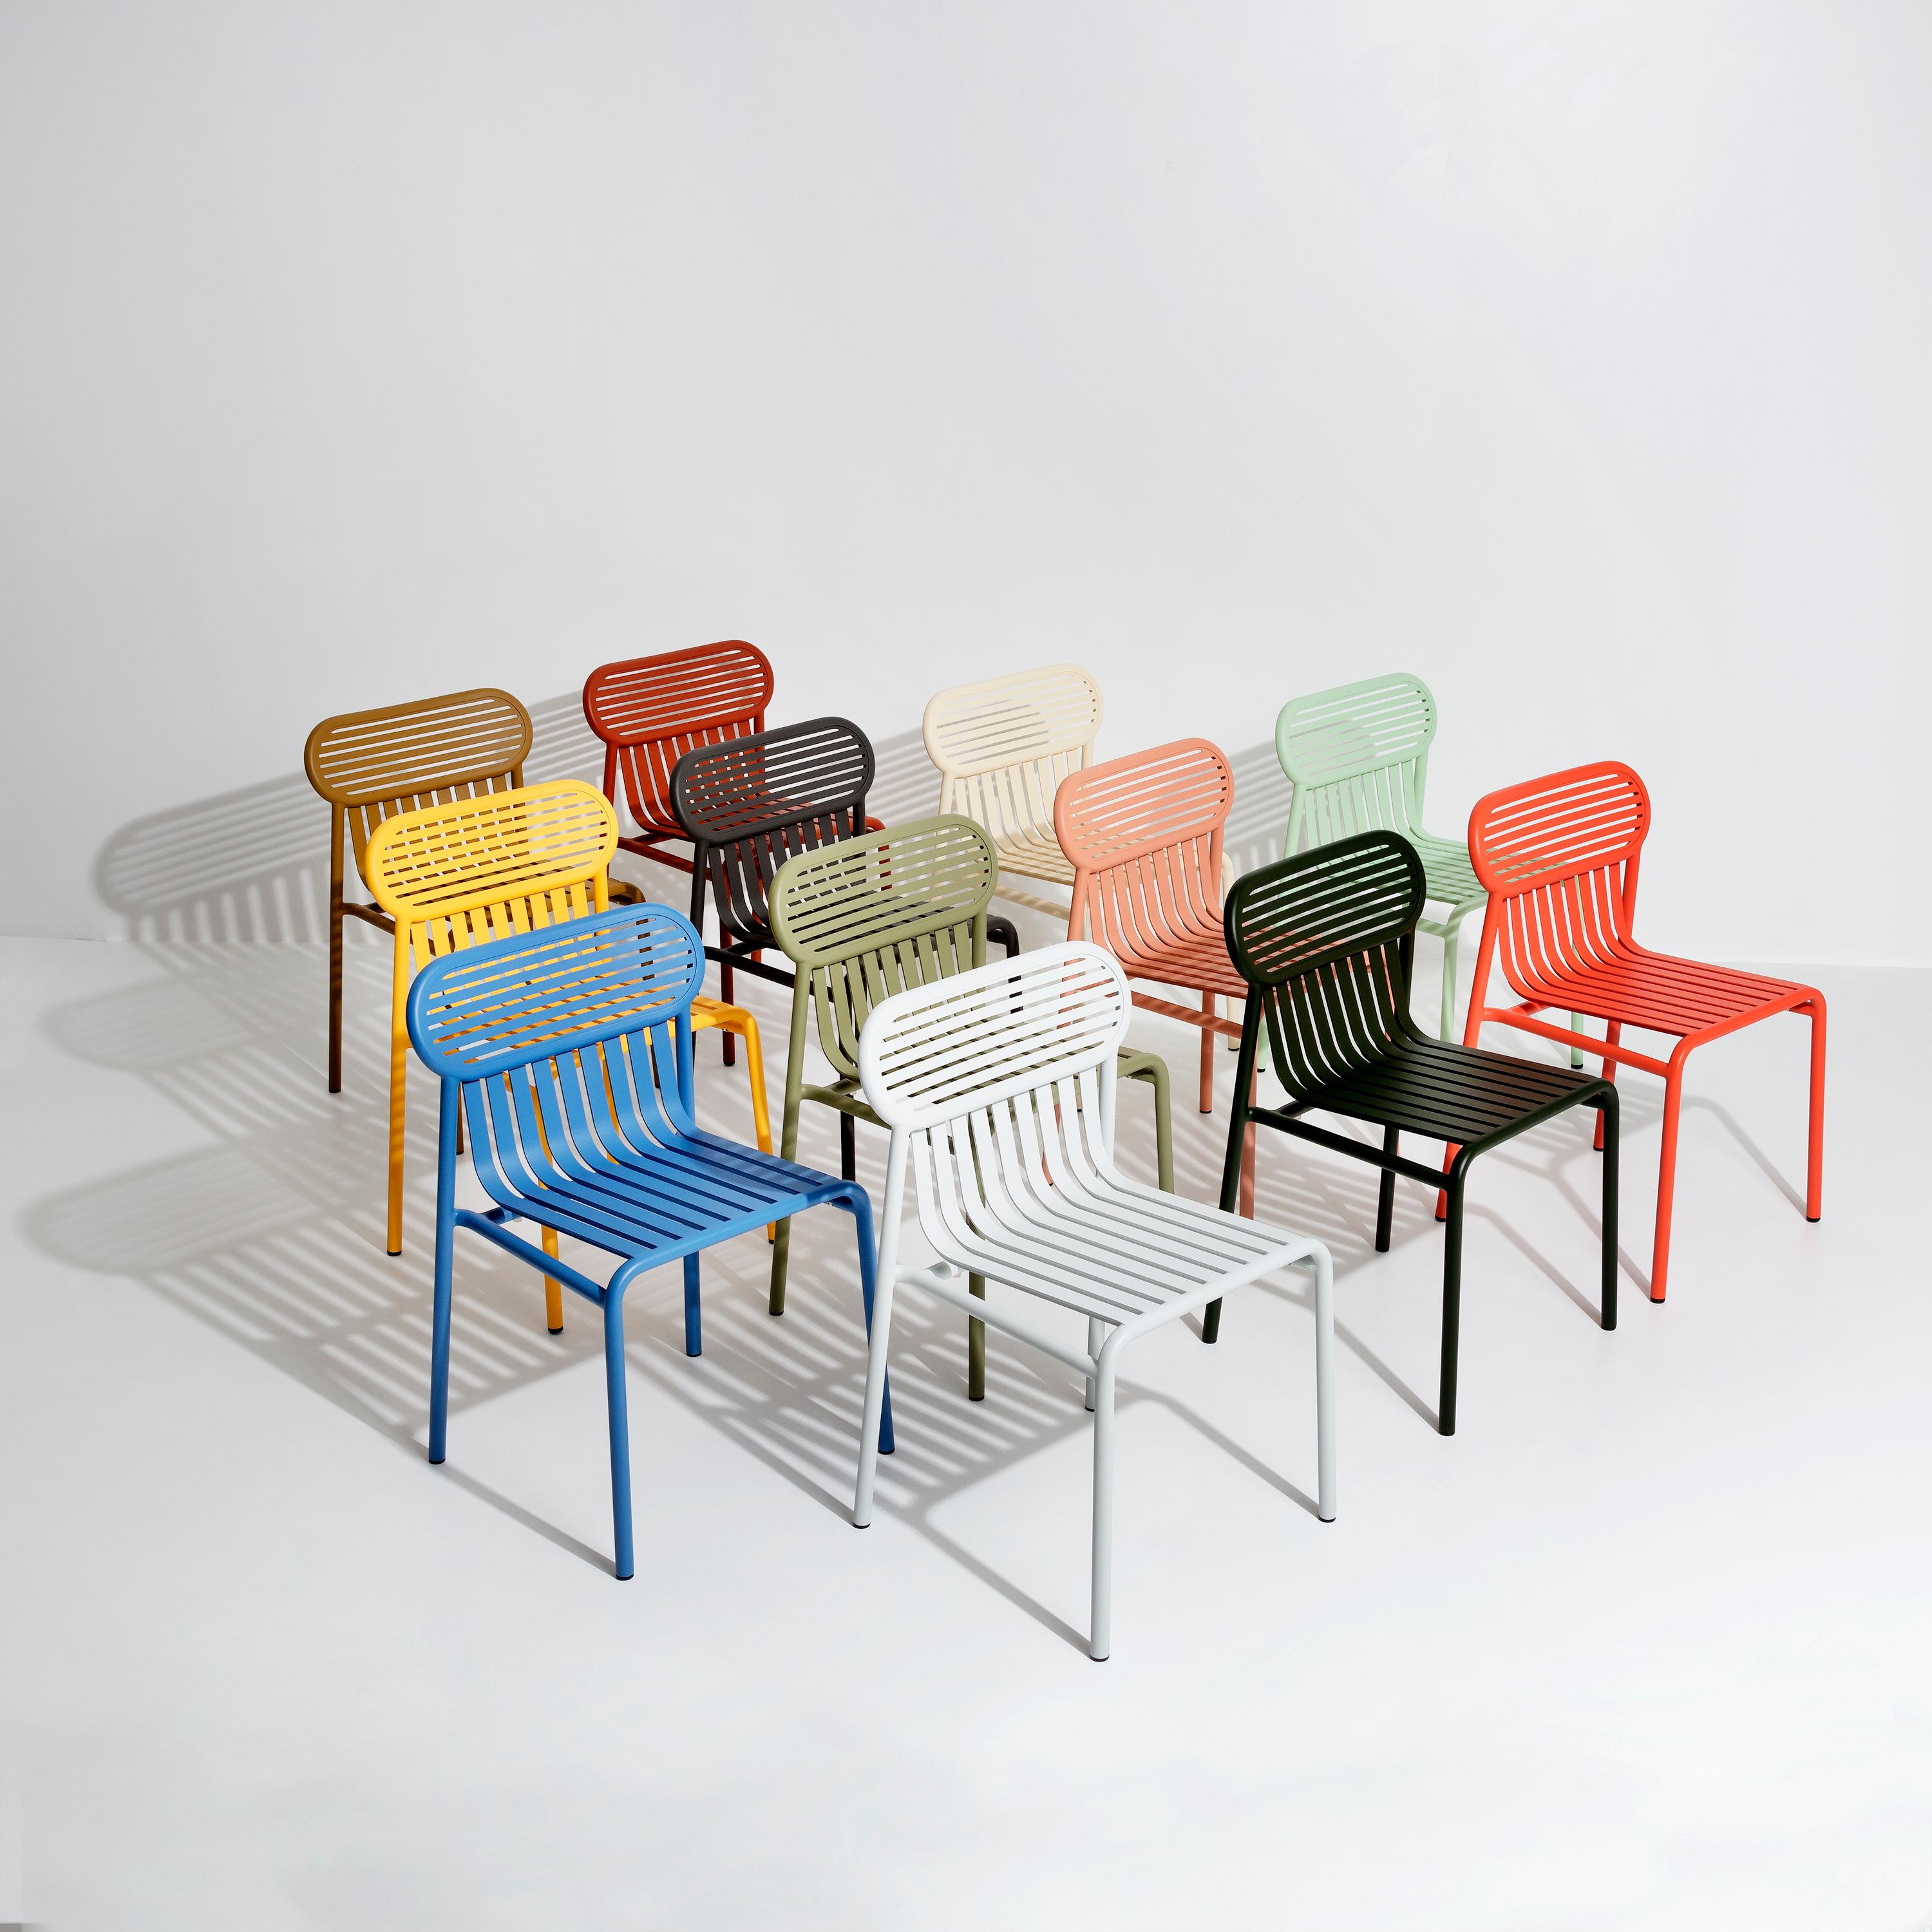 Petite Friture Week-End Chair in Anthracite Aluminium by Studio BrichetZiegler, 2017

The week-end collection is a full range of outdoor furniture, in aluminium grained epoxy paint, matt finish, that includes 18 functions and 8 colours for the